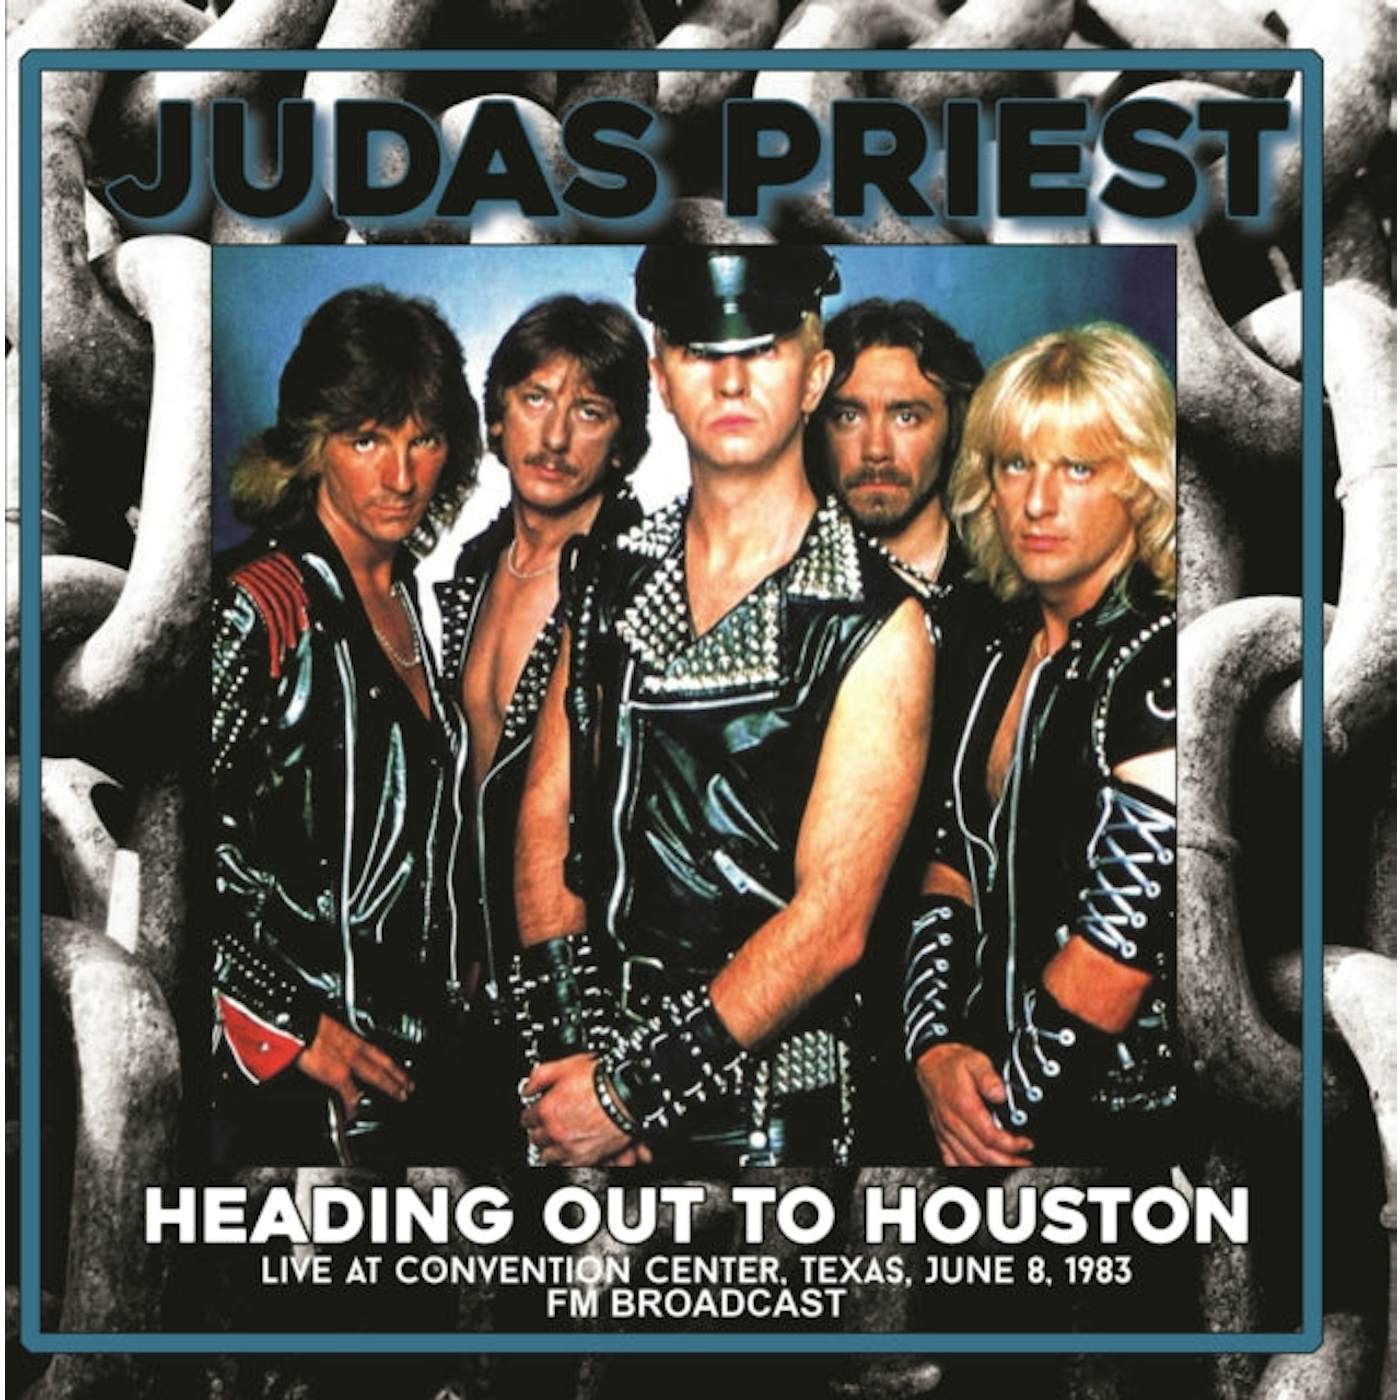 Judas Priest LP Vinyl Record  Heading Out To Houston: Live At Convention Center. Texas. June 8 19 83  Fm Broadcast